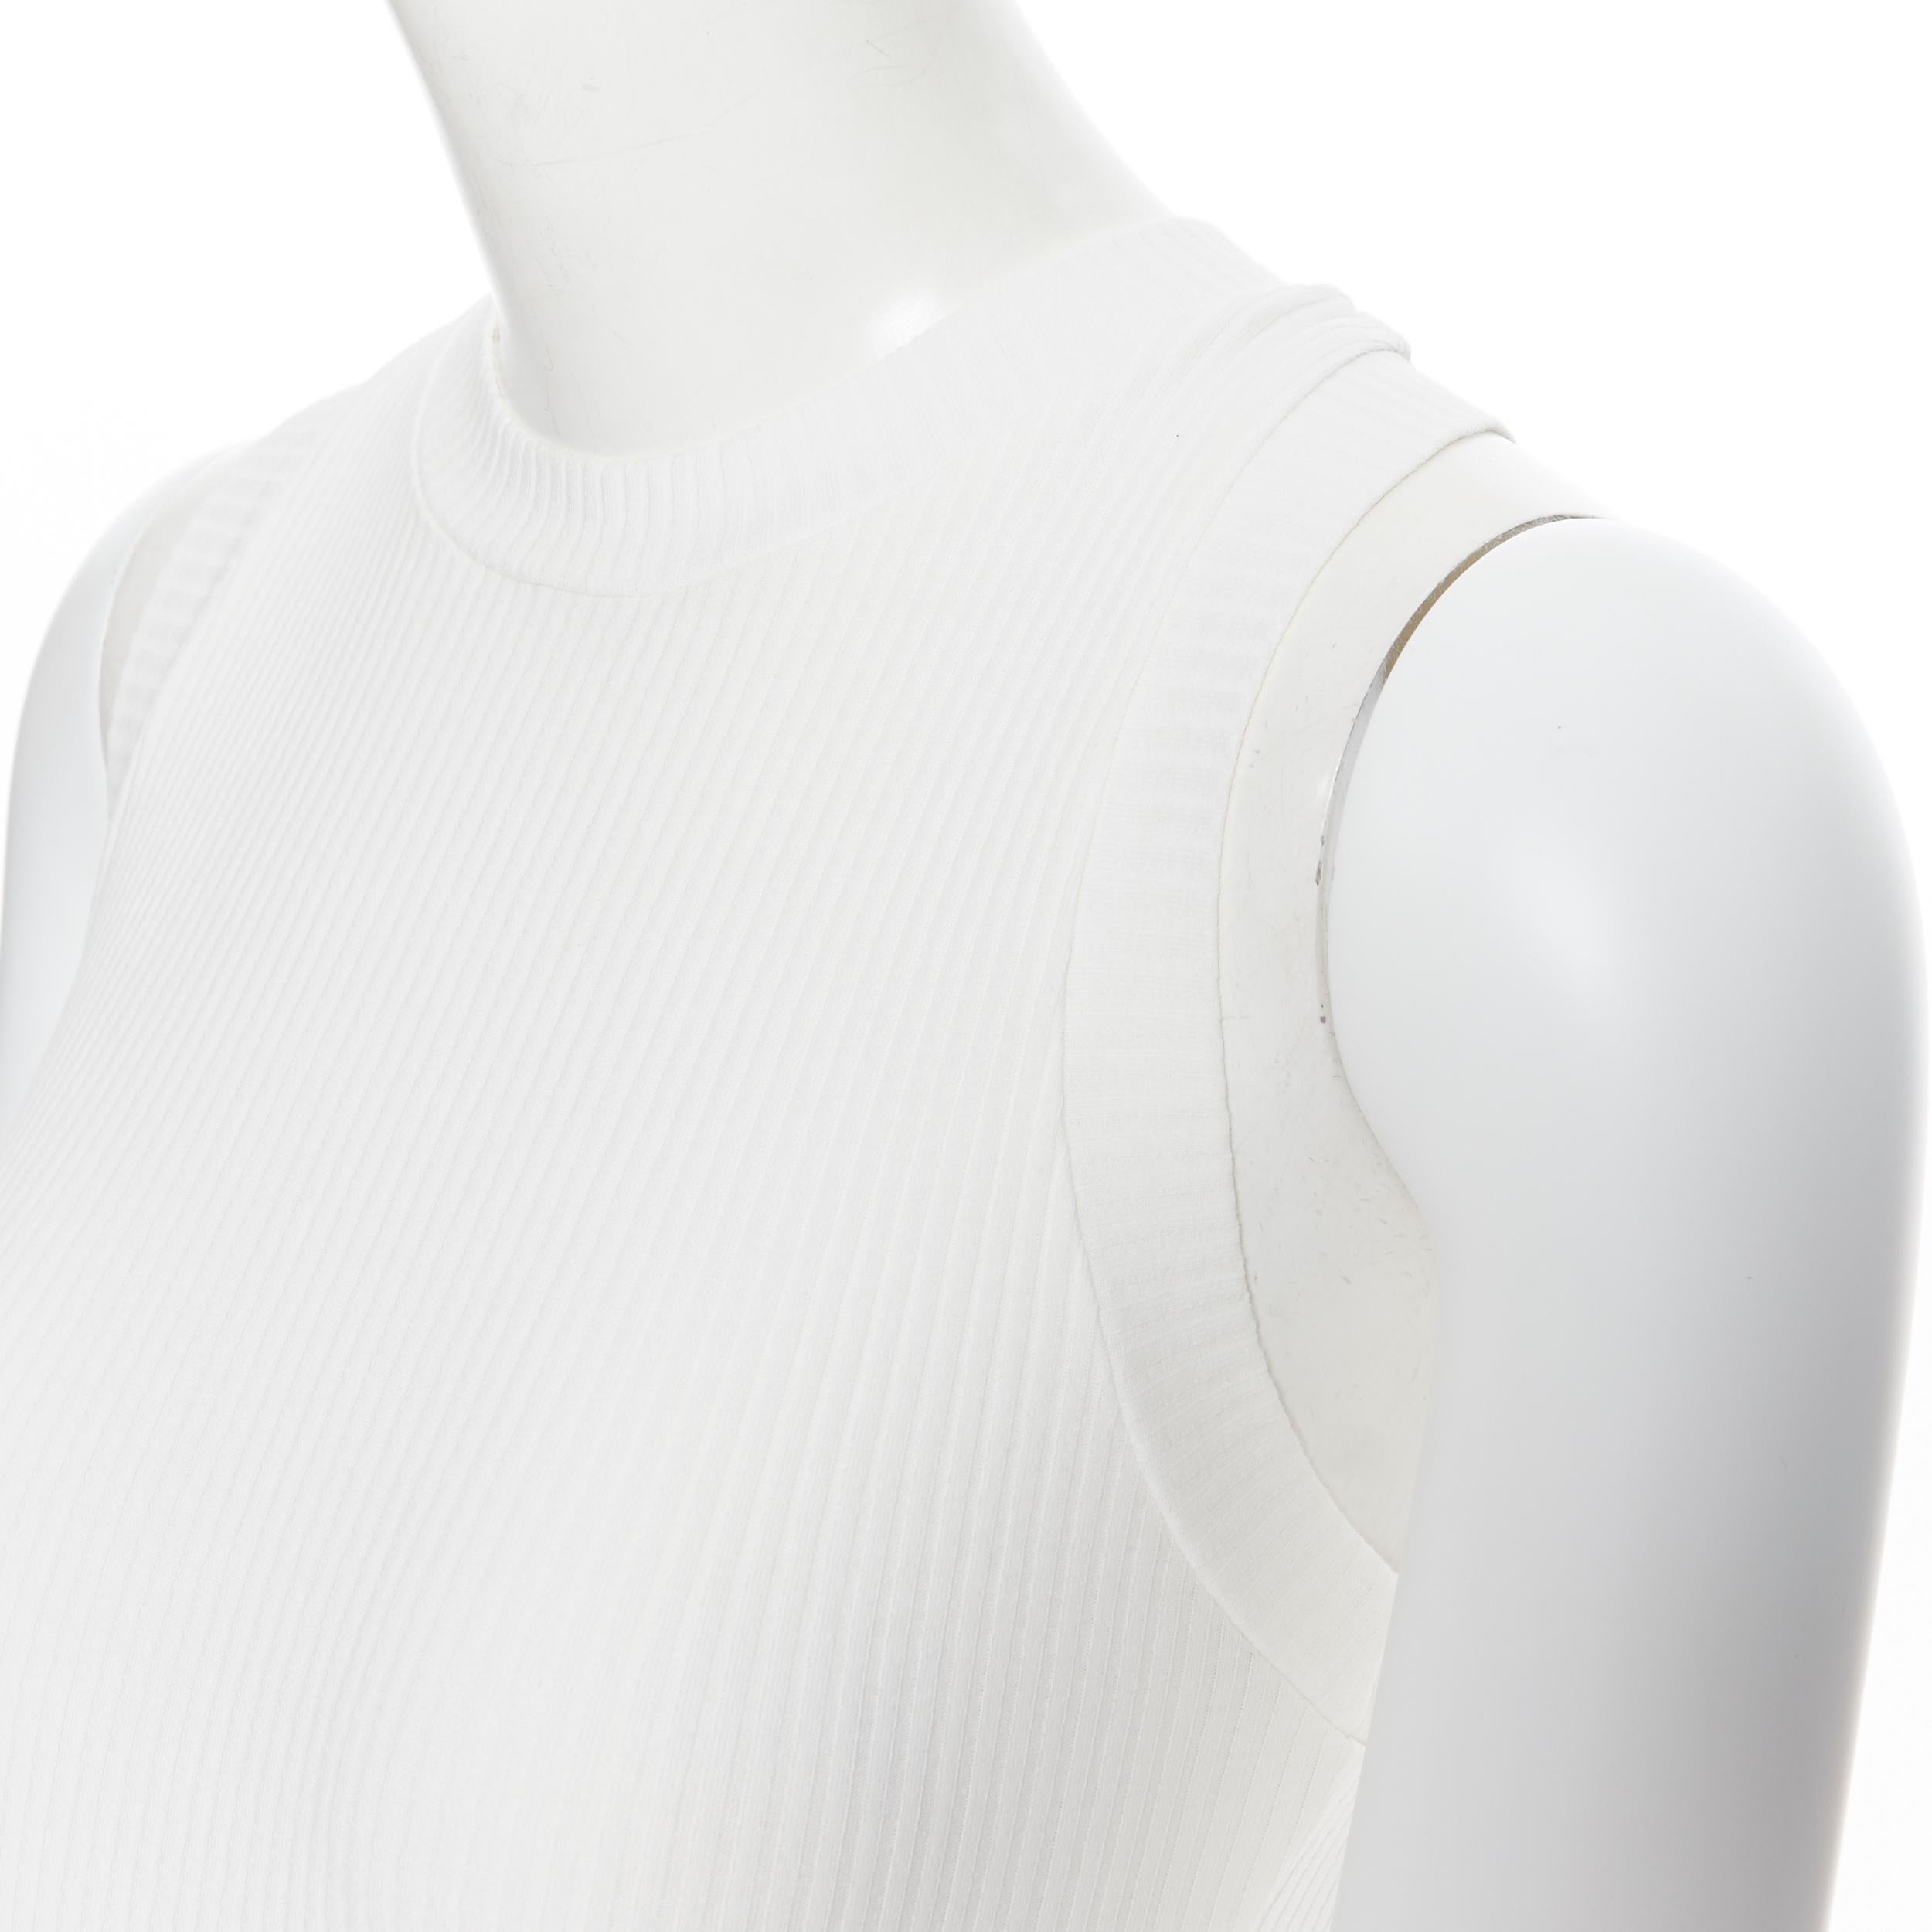 MR LARKIN ivory white ribbed stretch fit minimalist casual day dress XS
Brand: Mr Larkin
Designer: Mr Larkin
Model Name / Style: Ribbed dress
Material: Cotton, elastane
Color: White
Pattern: Solid
Extra Detail: Stretch fit. Sleeveless. Scoop neck